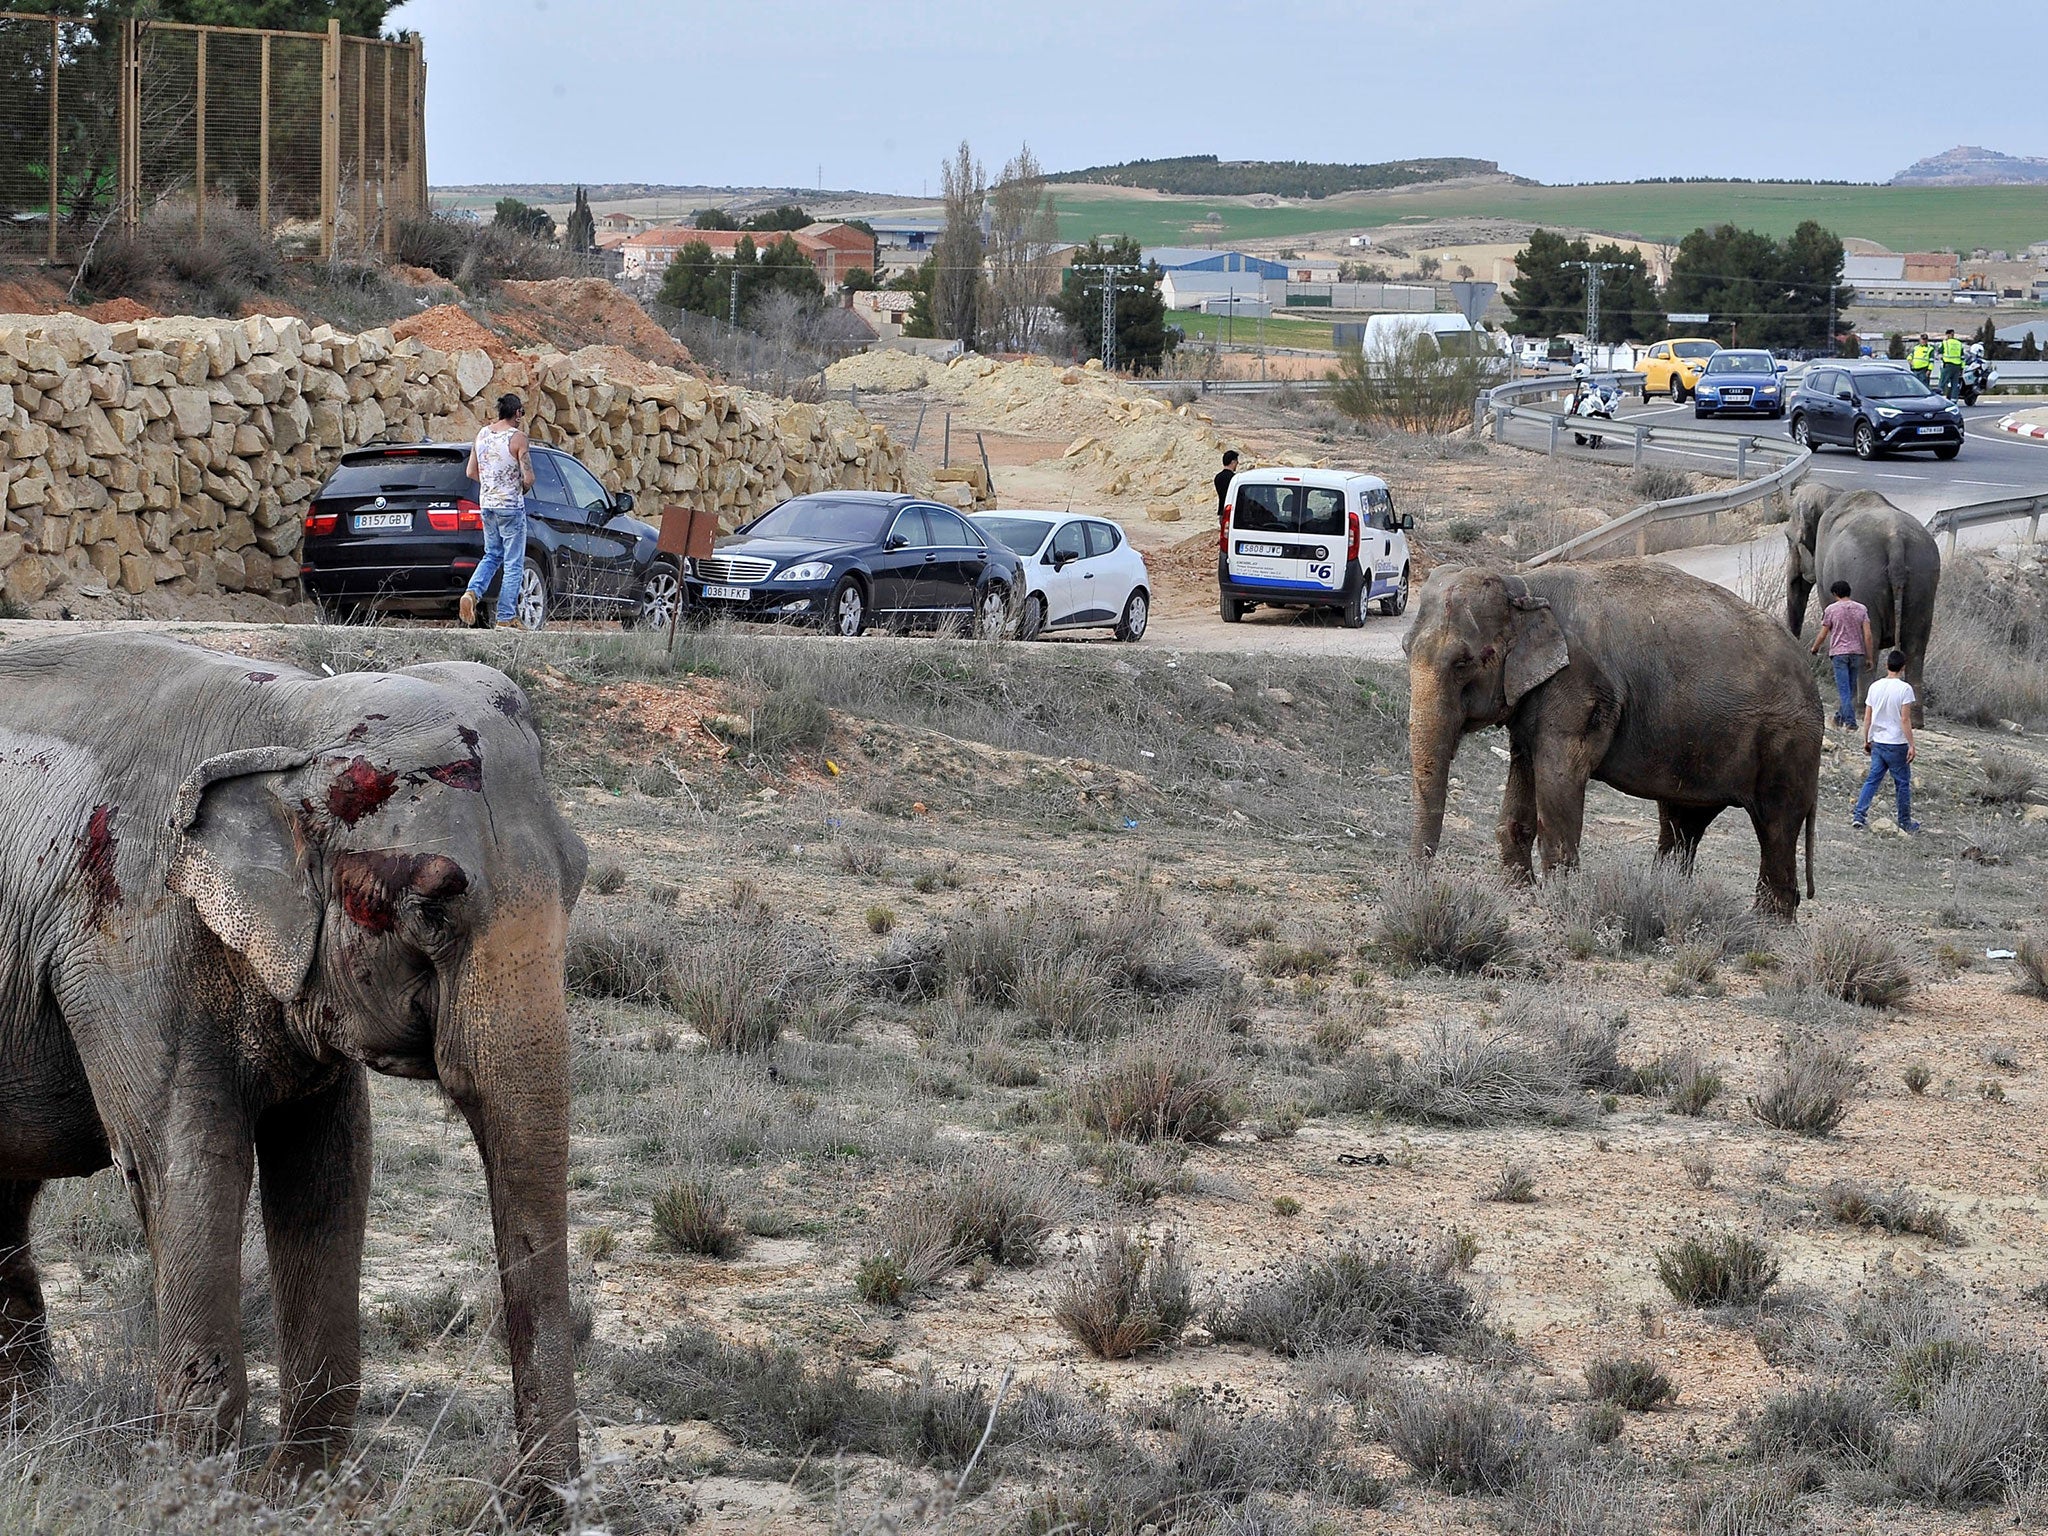 The four surviving elephants wandered the road, which was forced to close